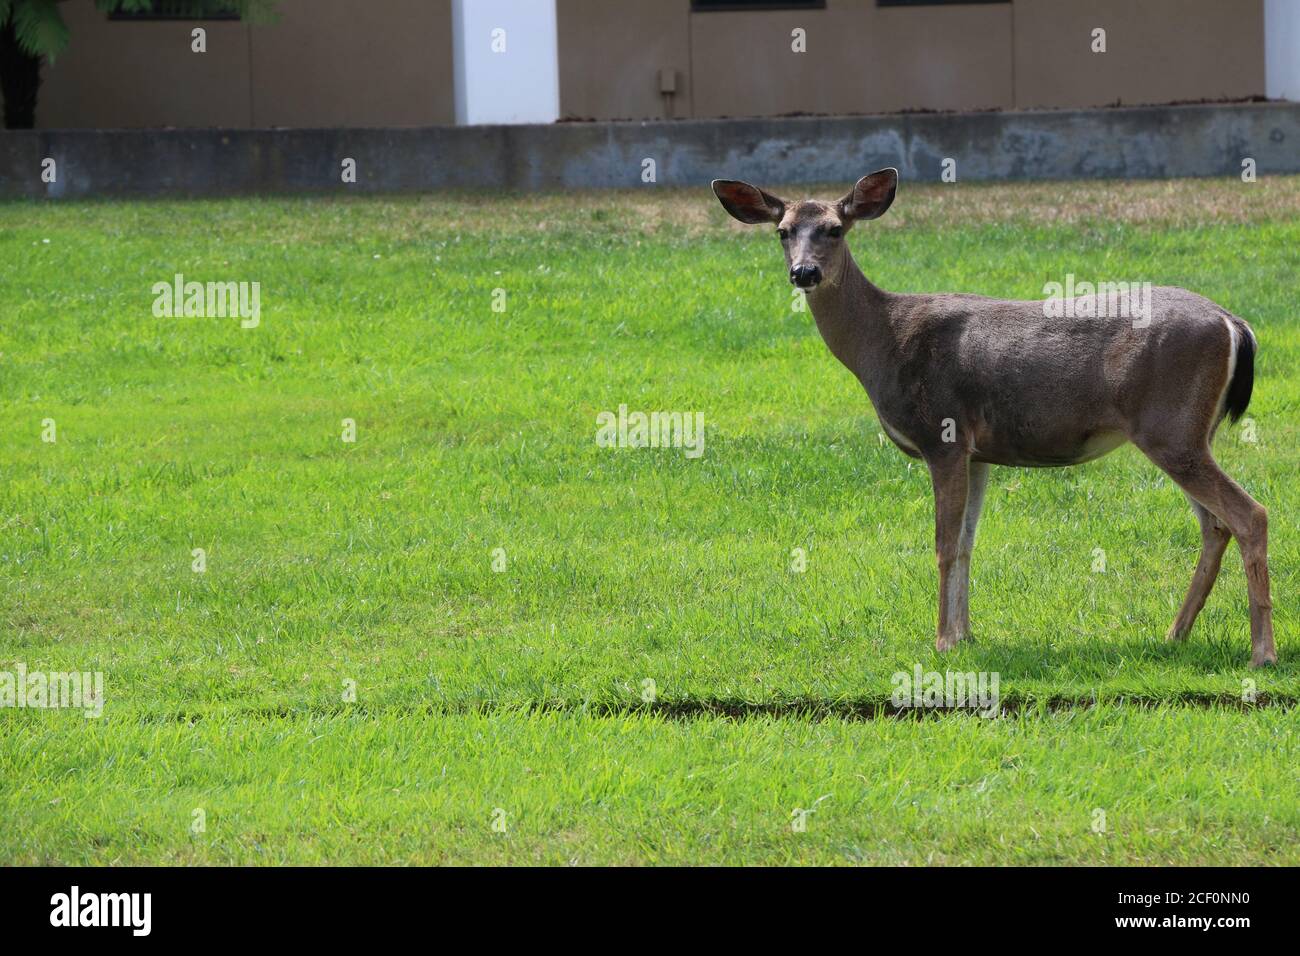 Gentle, brown female deer with large, soft ears stands in a watchful, curious pose on green grass. Stock Photo